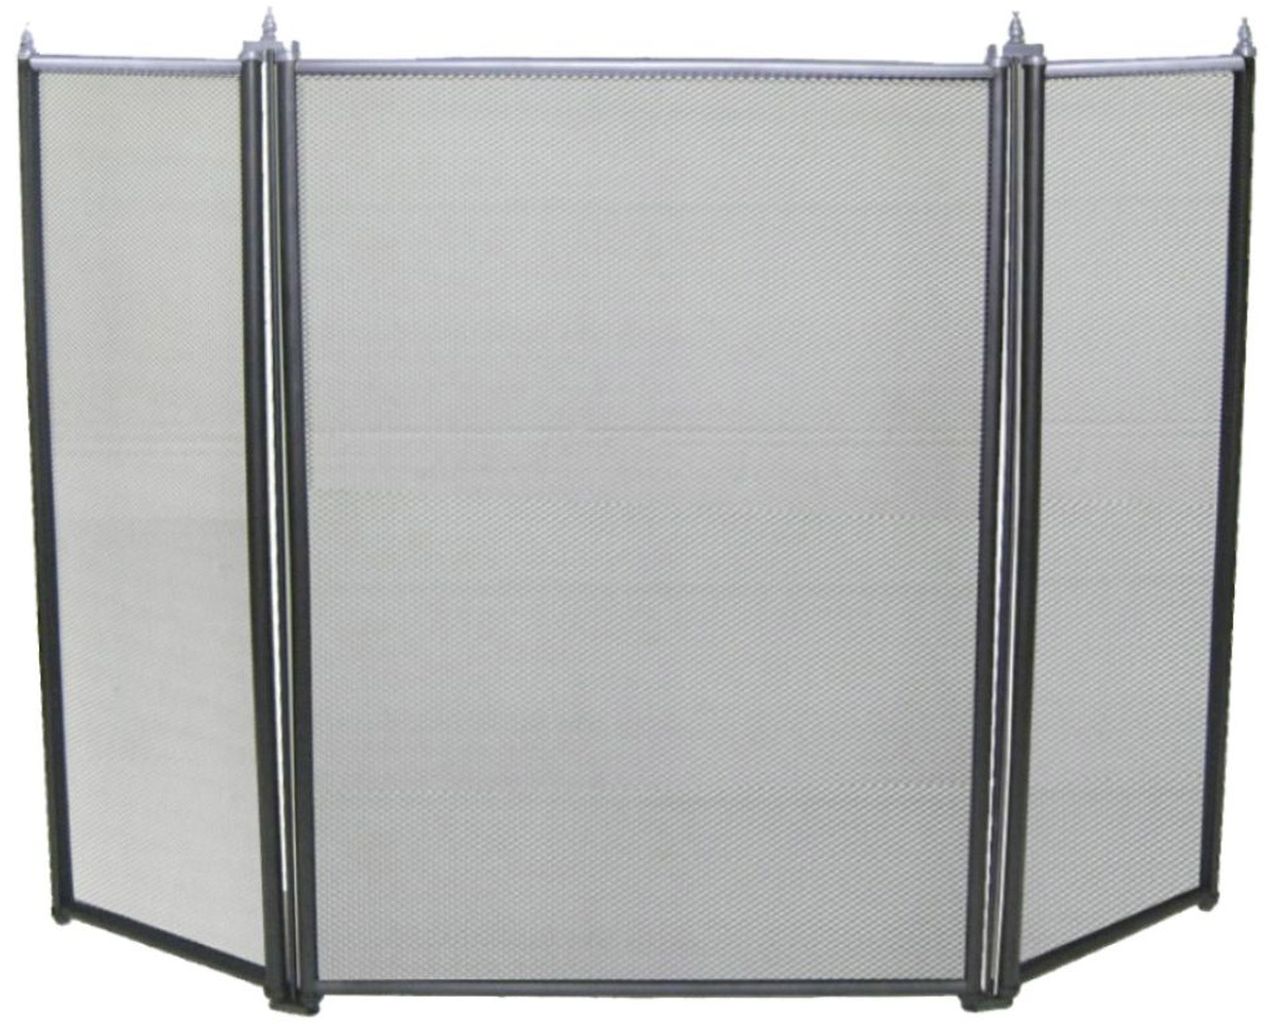 Maxiheat 3 Panel Firescreen with Chrome Trim, , hi-res image number null